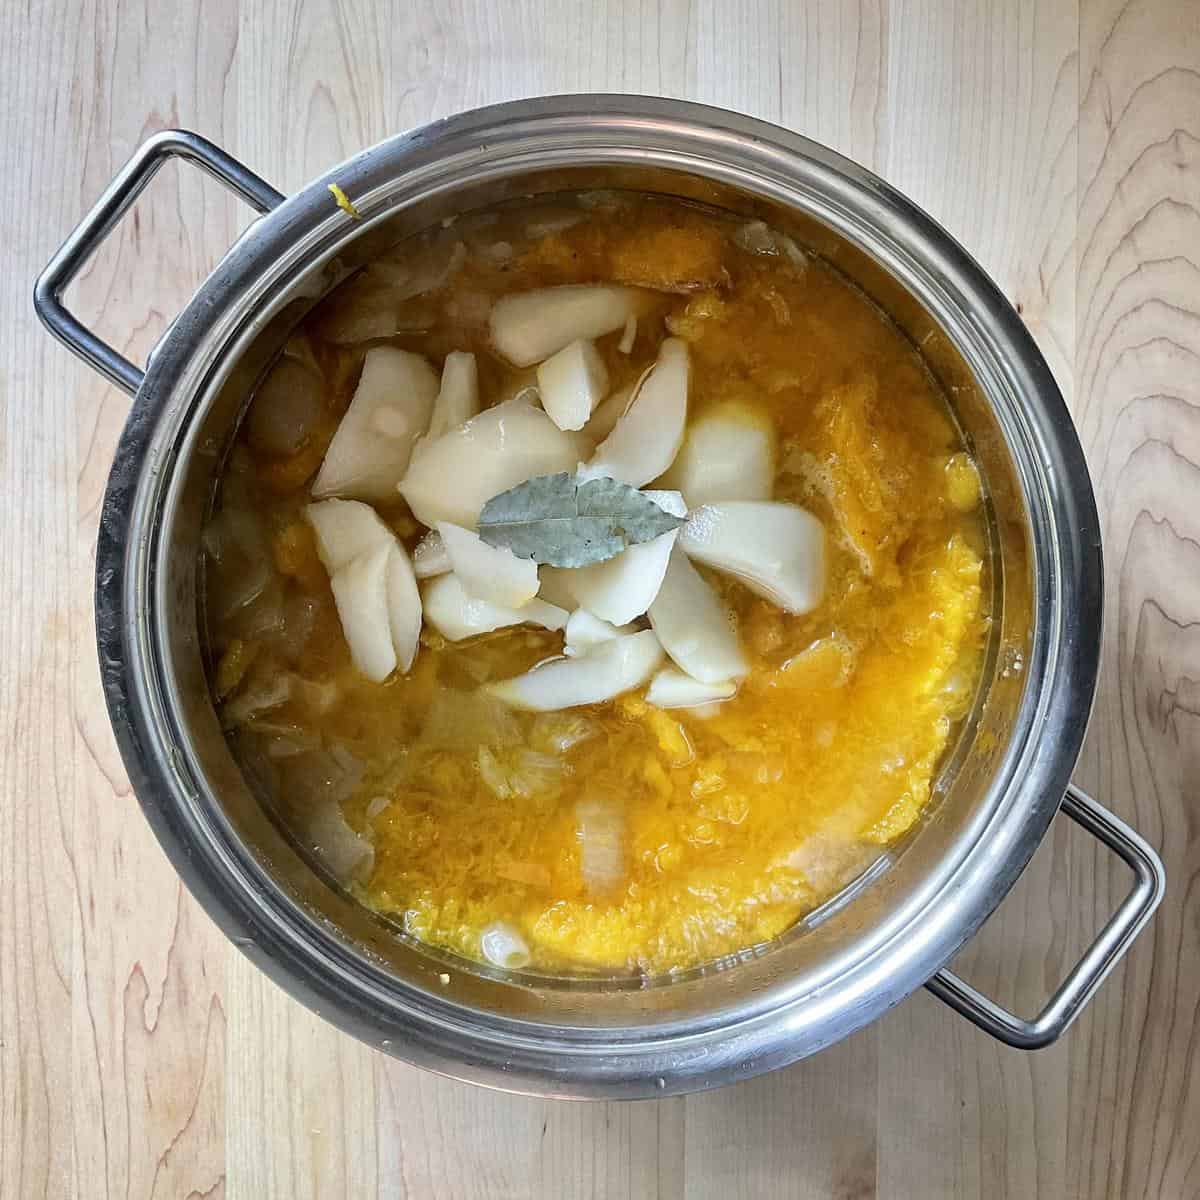 Chopped pears and roasted butternut squash in a pot.